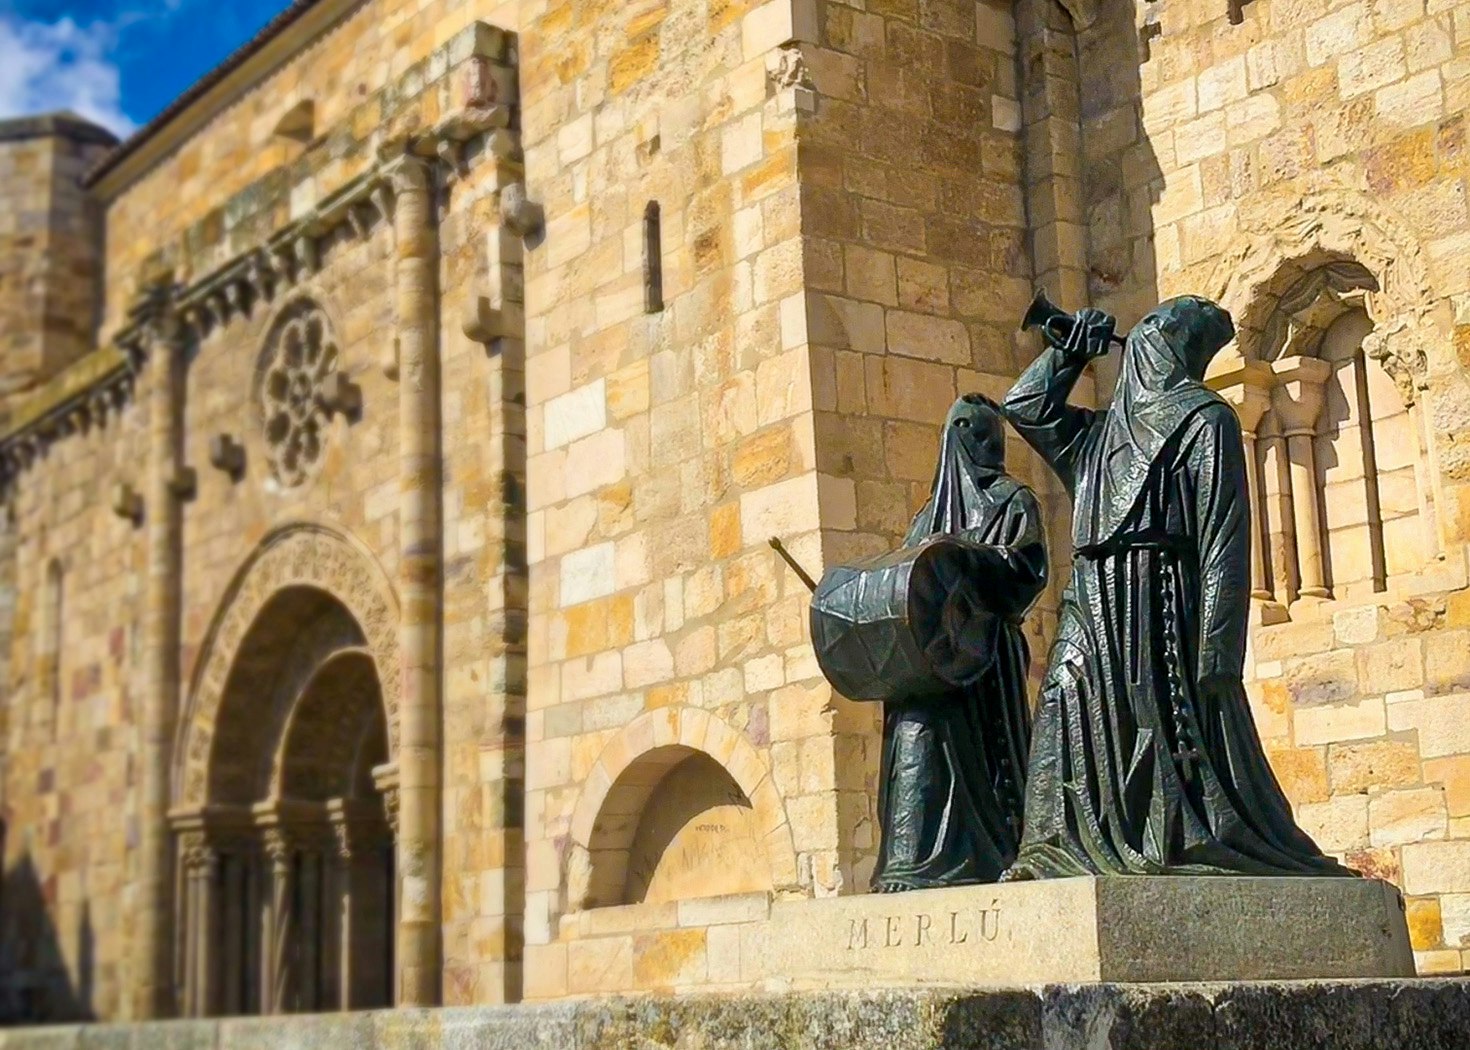 Dark, metallic statues of figures wearing hoods, beating drums and sounding horns, stand in front of the sandstone facade of a Romanesque church in Zamora, Spain